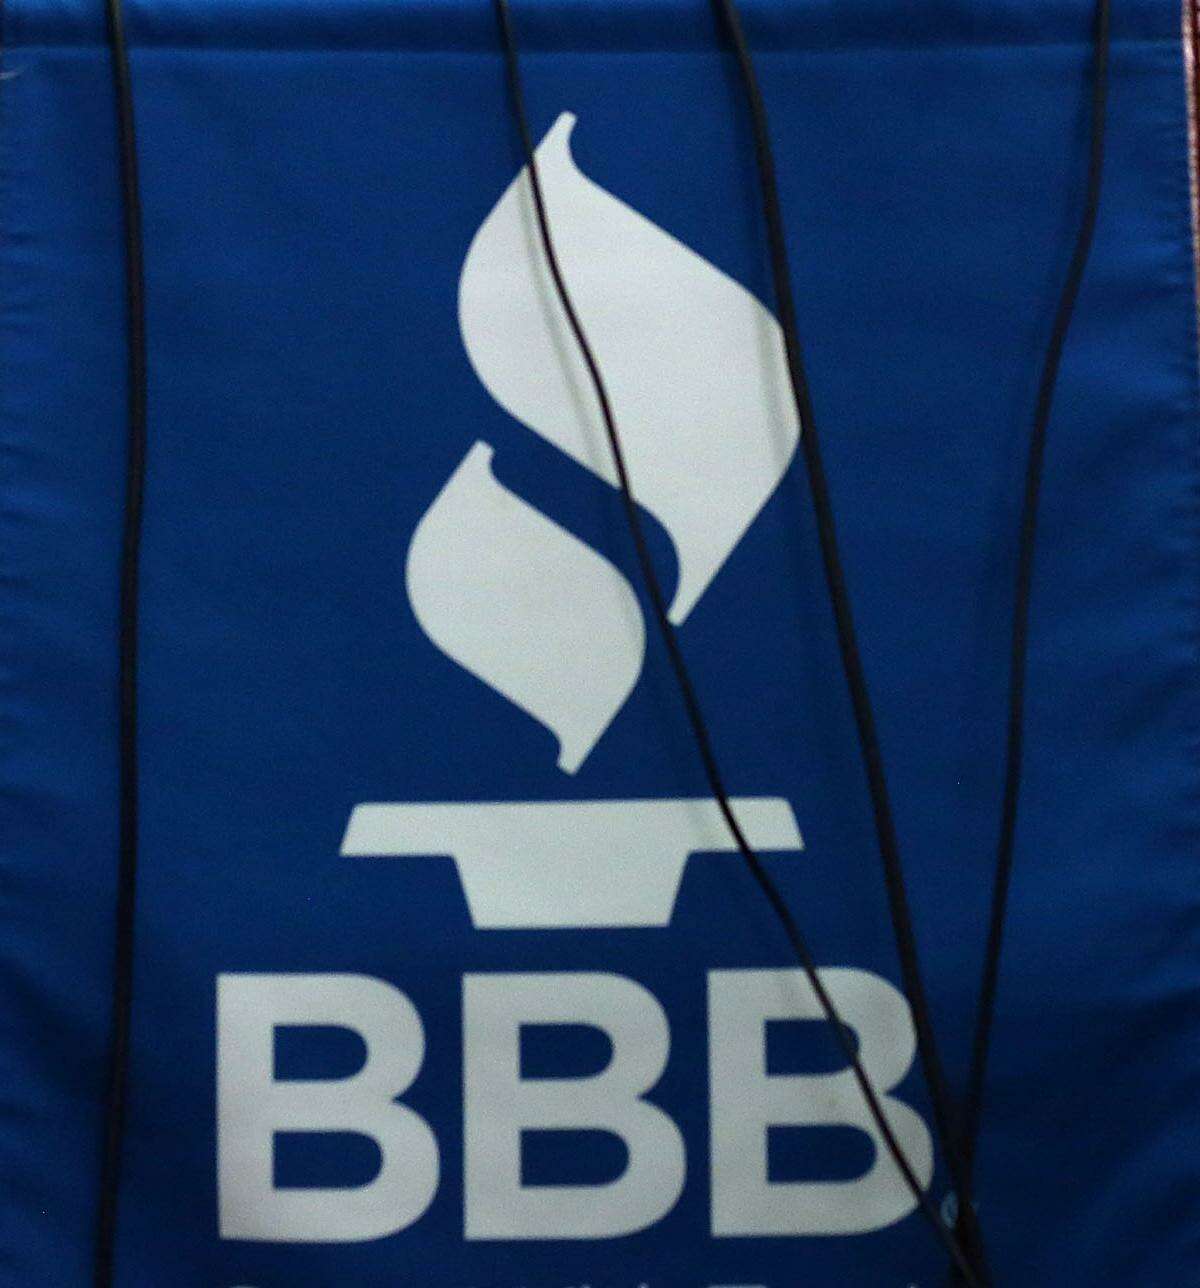 The Better Business Bureau helps donors check on charities with its internet site www.give.org, which is operated by the BBB’s Wise Giving Alliance.